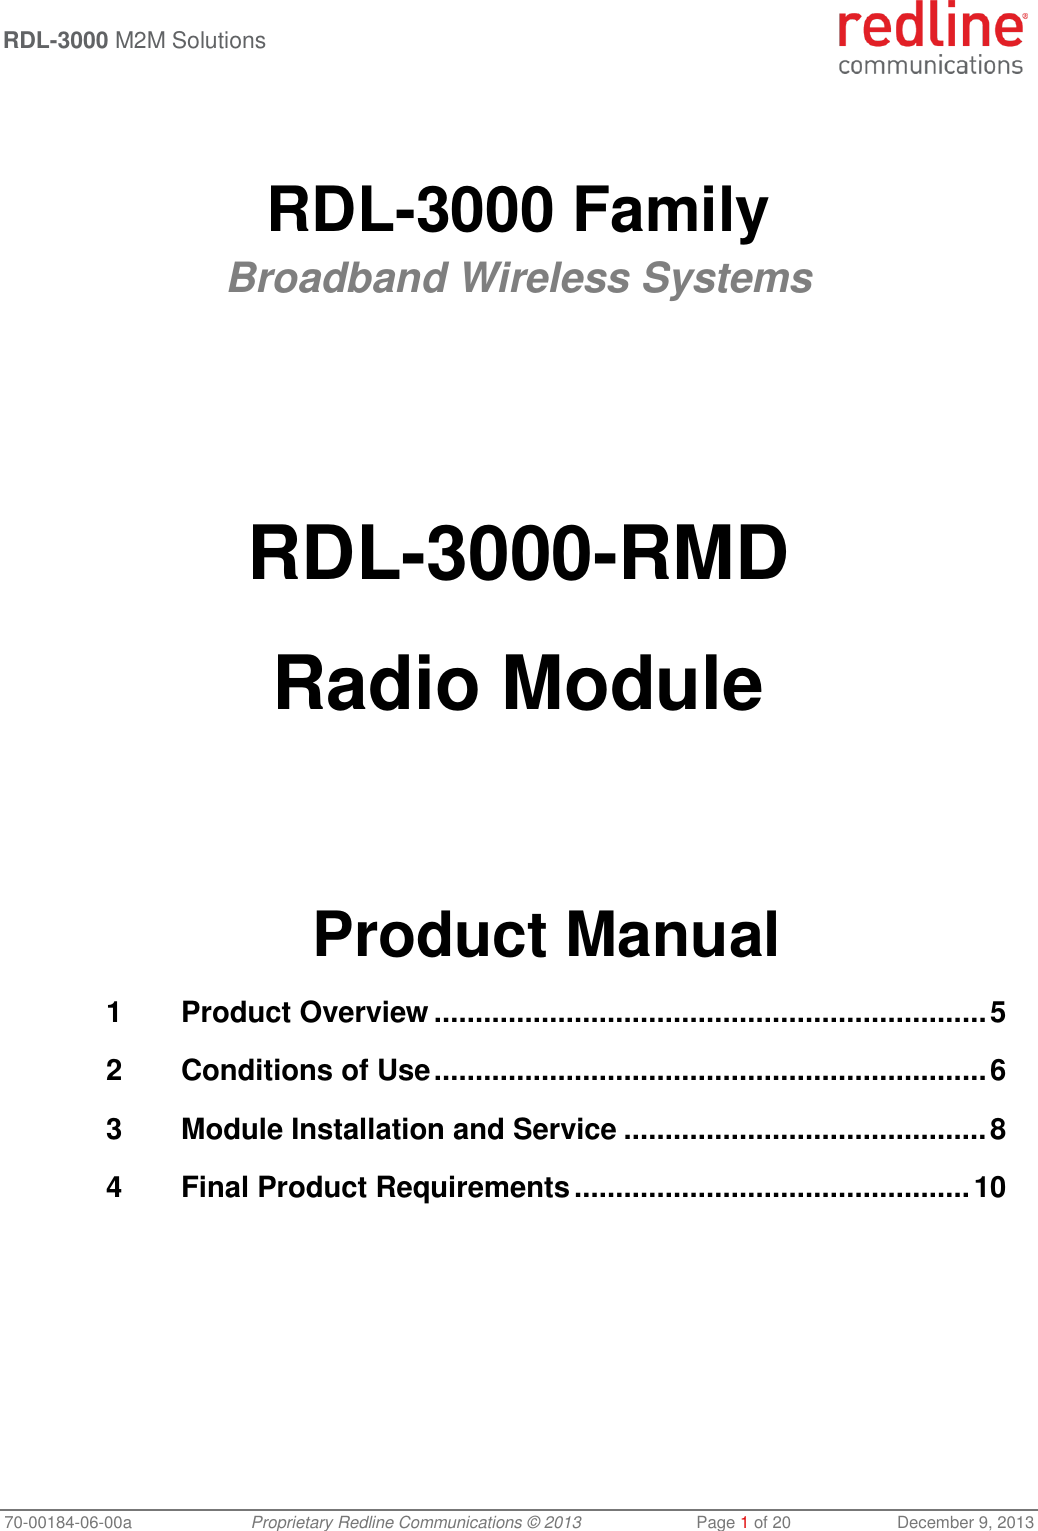  RDL-3000 M2M Solutions   70-00184-06-00a  Proprietary Redline Communications © 2013  Page 1 of 20  December 9, 2013   RDL-3000 Family Broadband Wireless Systems        RDL-3000-RMD  Radio Module       Product Manual 1 Product Overview ................................................................... 5 2 Conditions of Use ................................................................... 6 3 Module Installation and Service ............................................ 8 4 Final Product Requirements ................................................ 10 